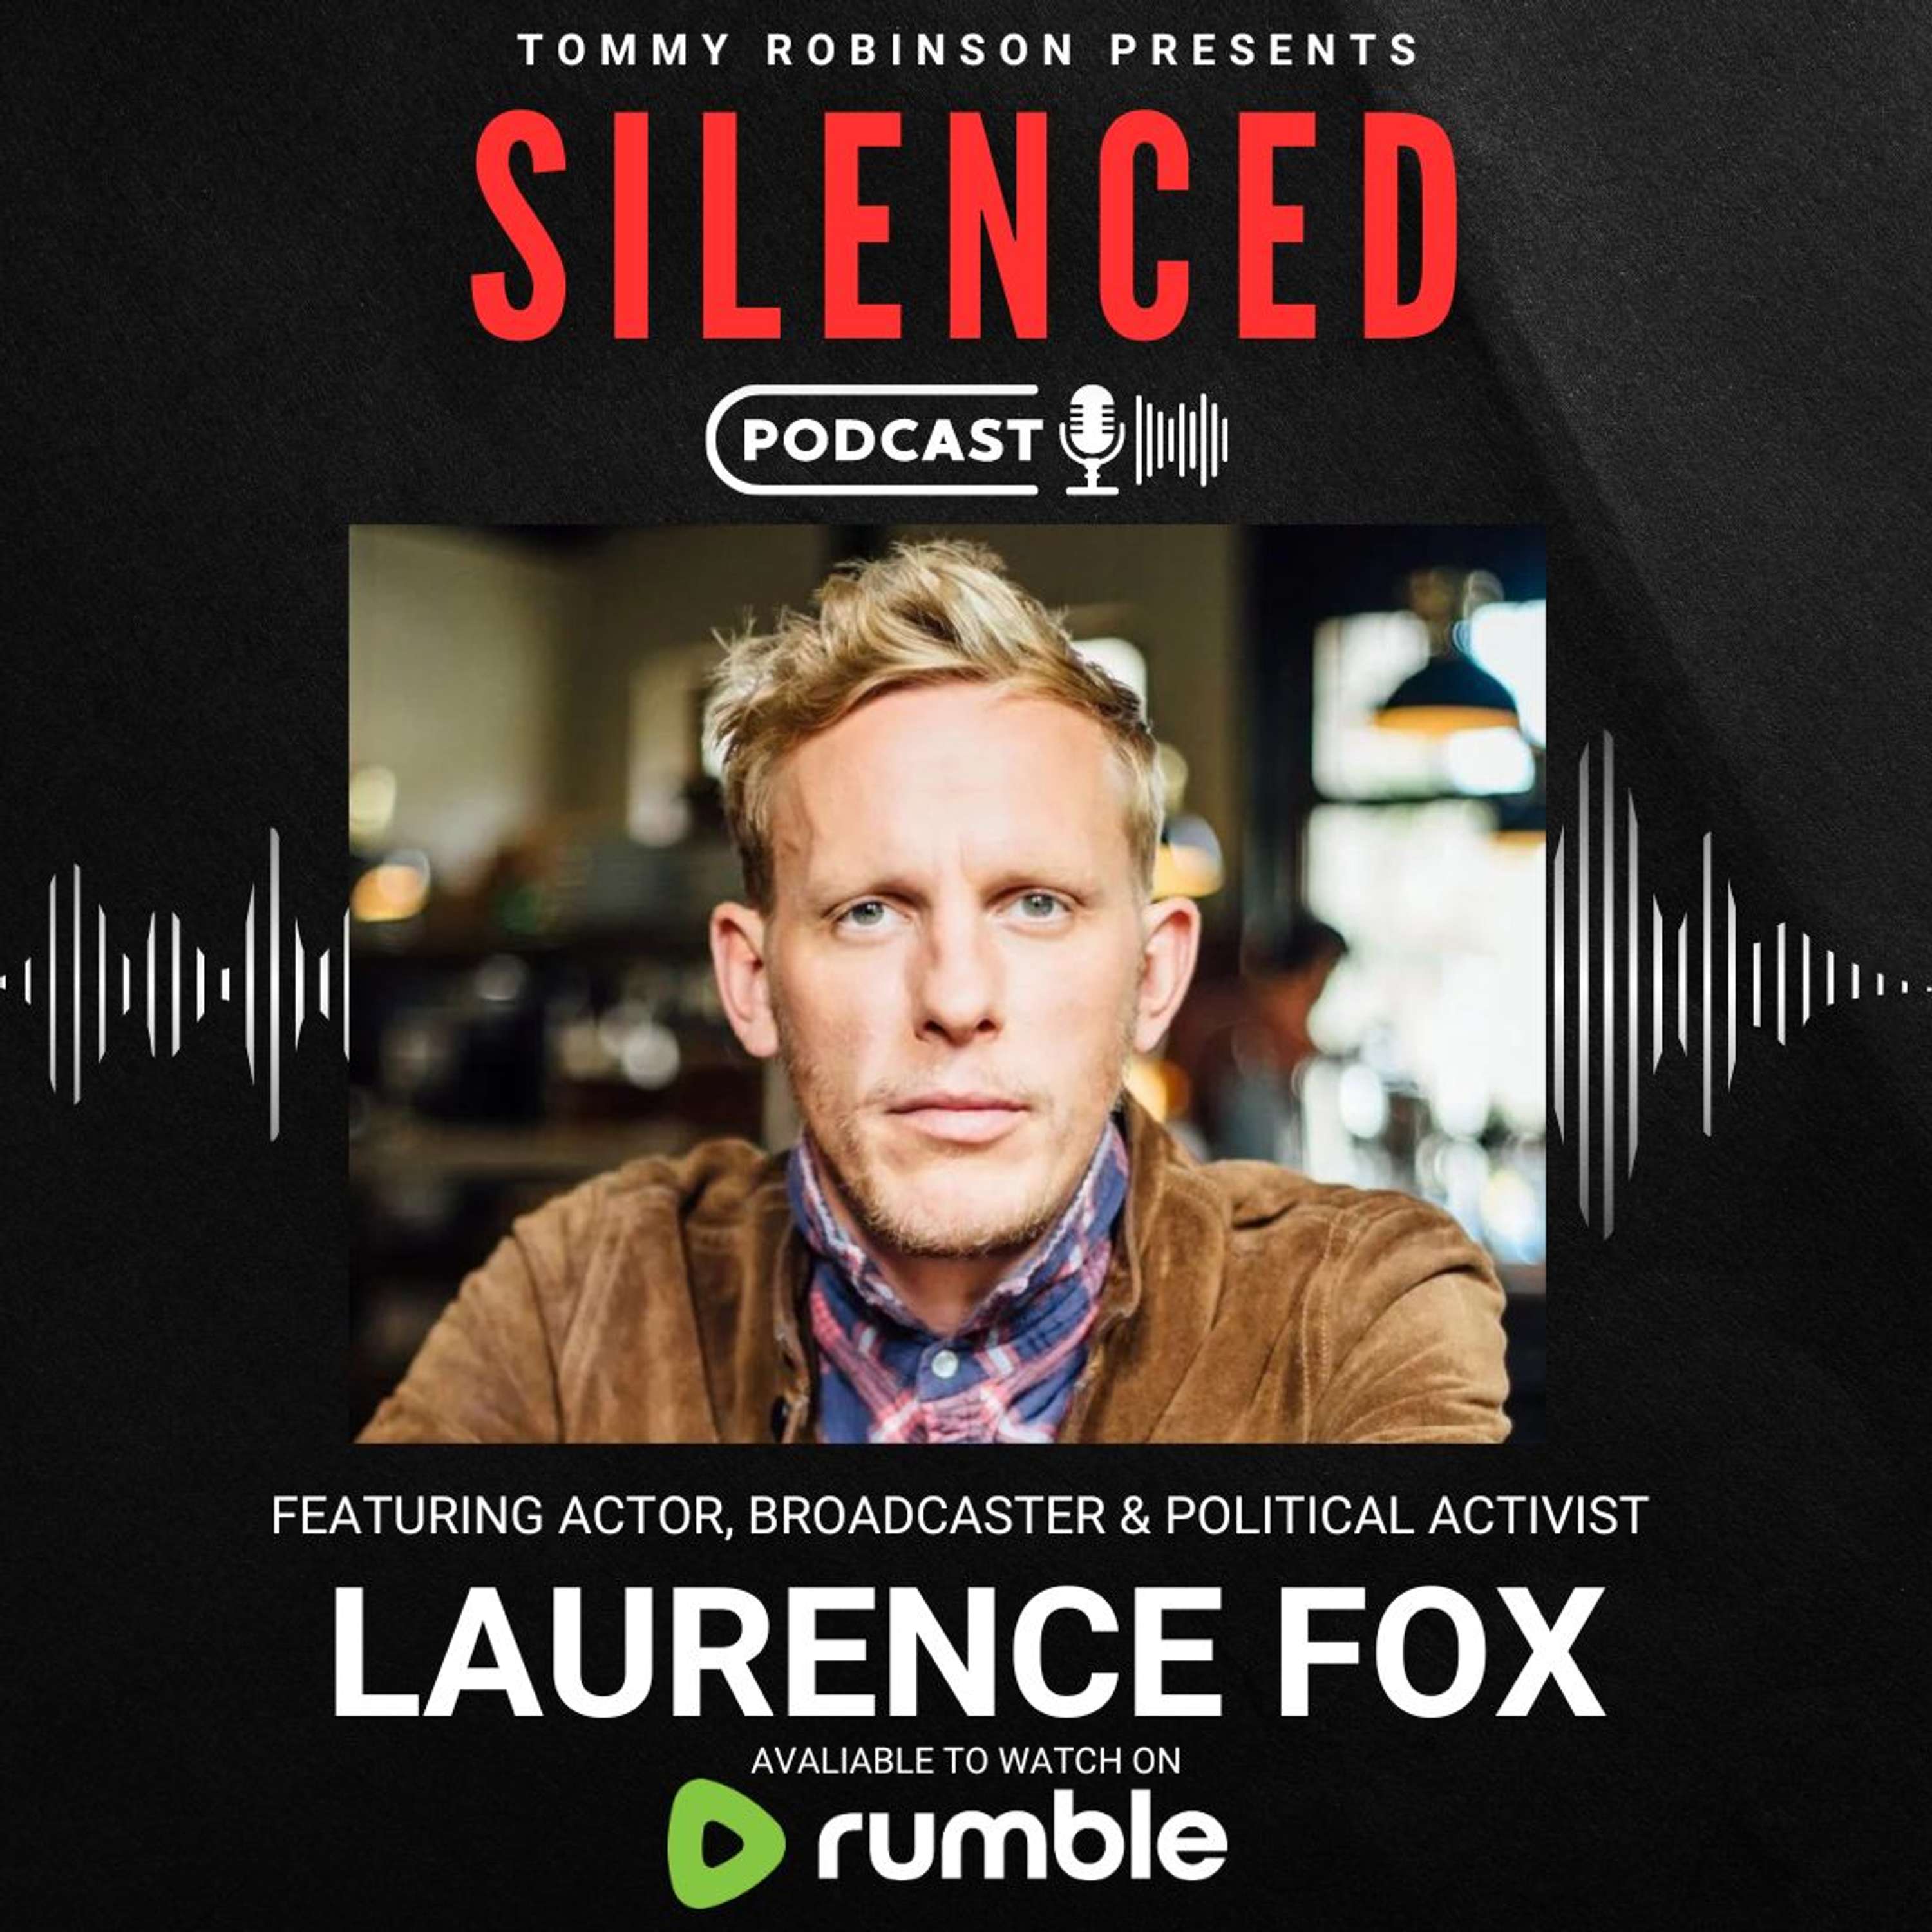 Episode 34 - SILENCED with Tommy Robinson - Laurence Fox